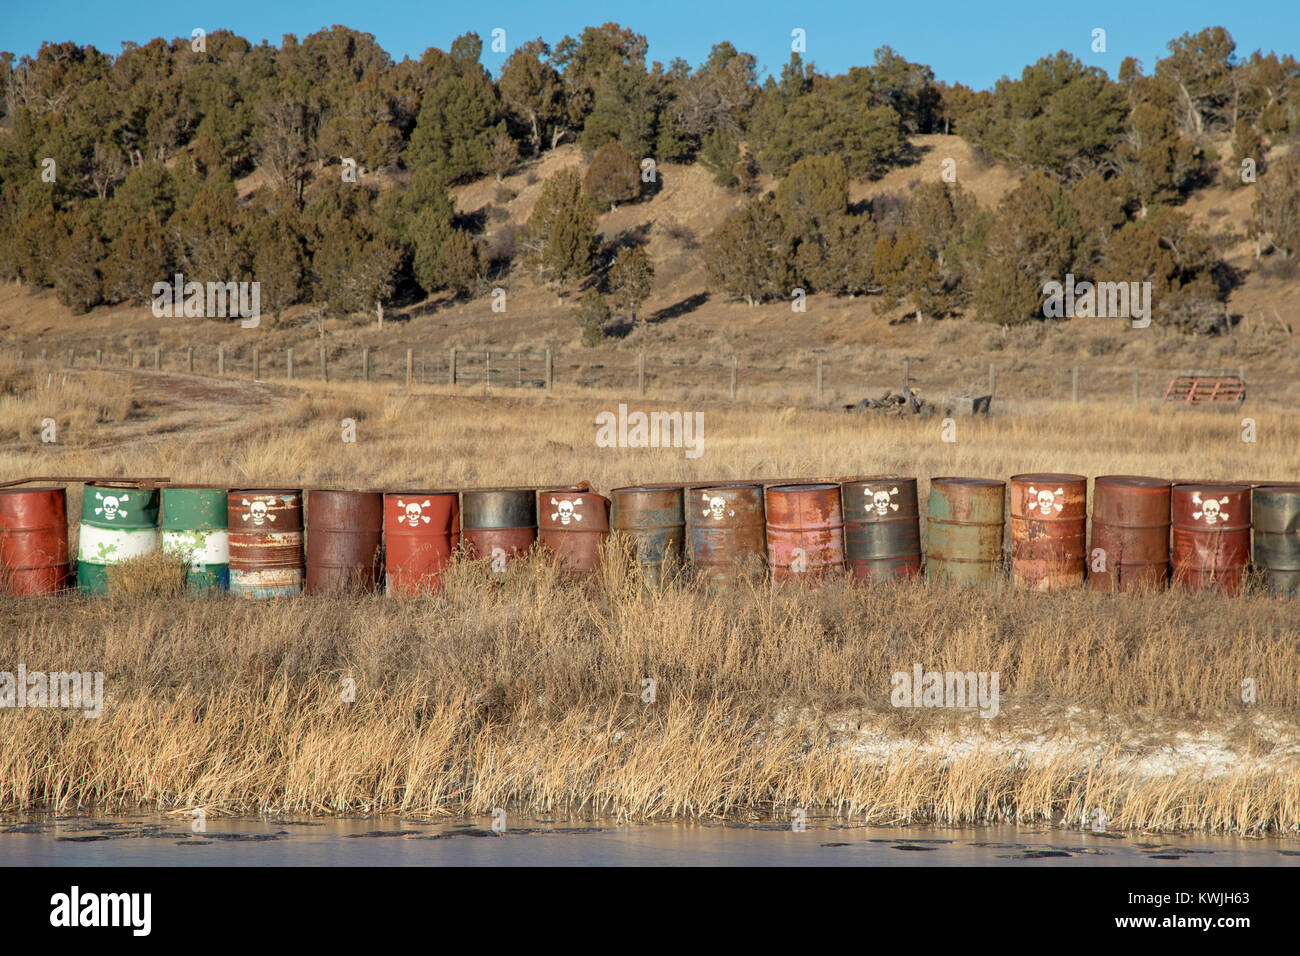 Mancos, Colorado - A closed Sinclair gas station/convenience store with leaking underground gasoline storage tanks. The property is near the entrance  Stock Photo